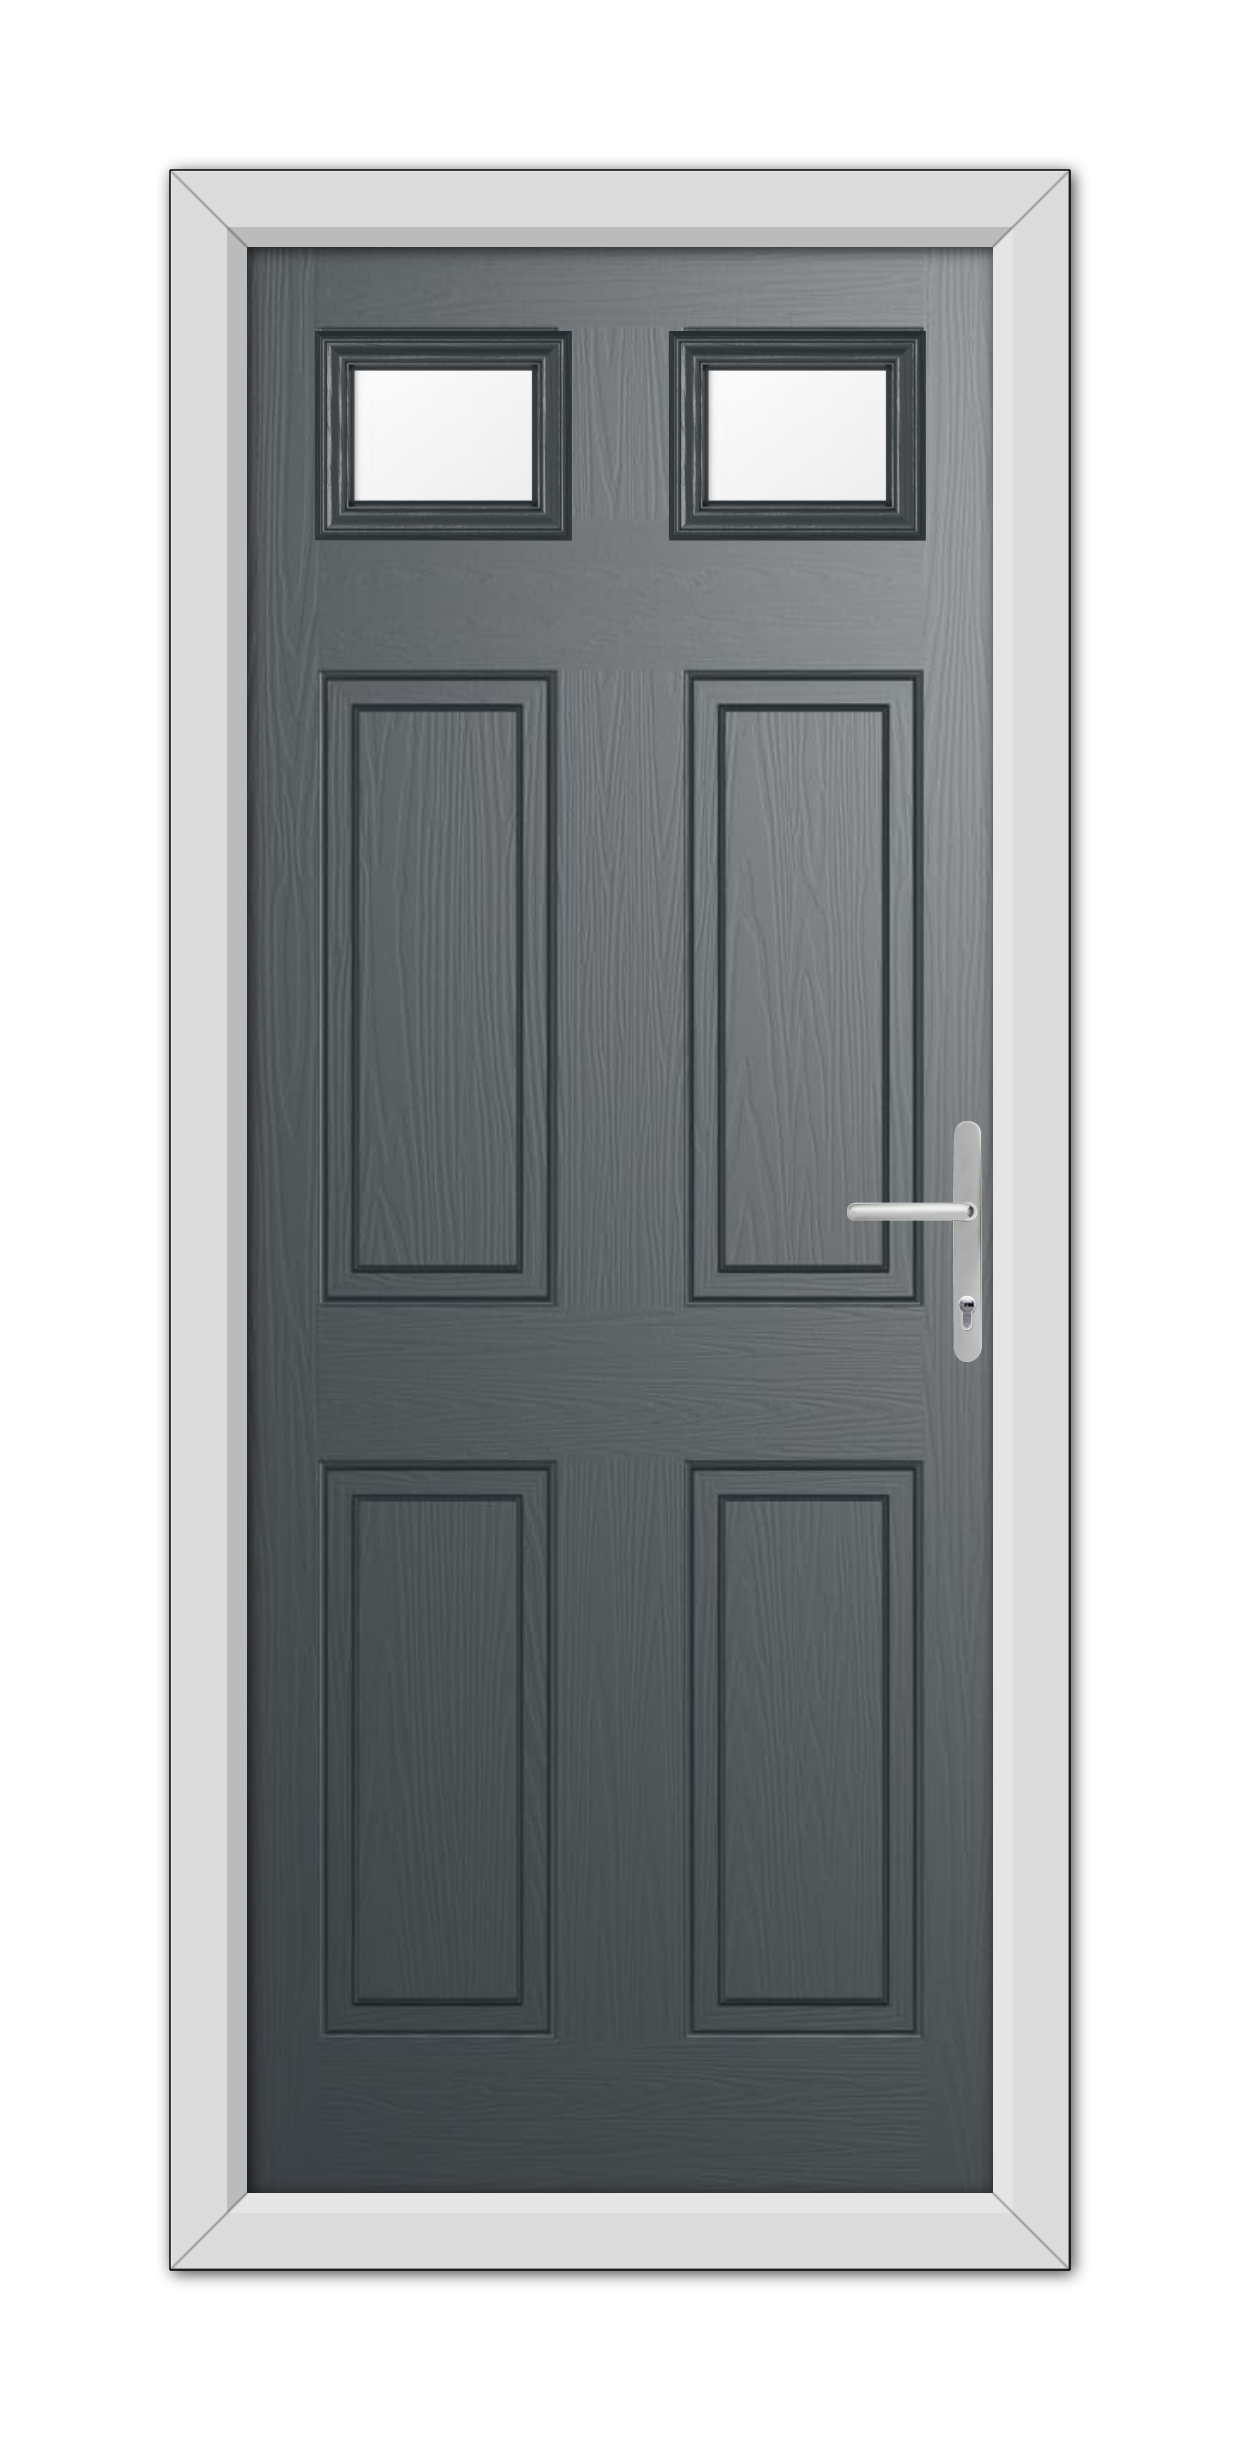 A modern Anthracite Grey Middleton Glazed 2 Composite Door 48mm Timber Core with rectangular panels and a silver handle, surrounded by a white frame and featuring three small windows at the top.